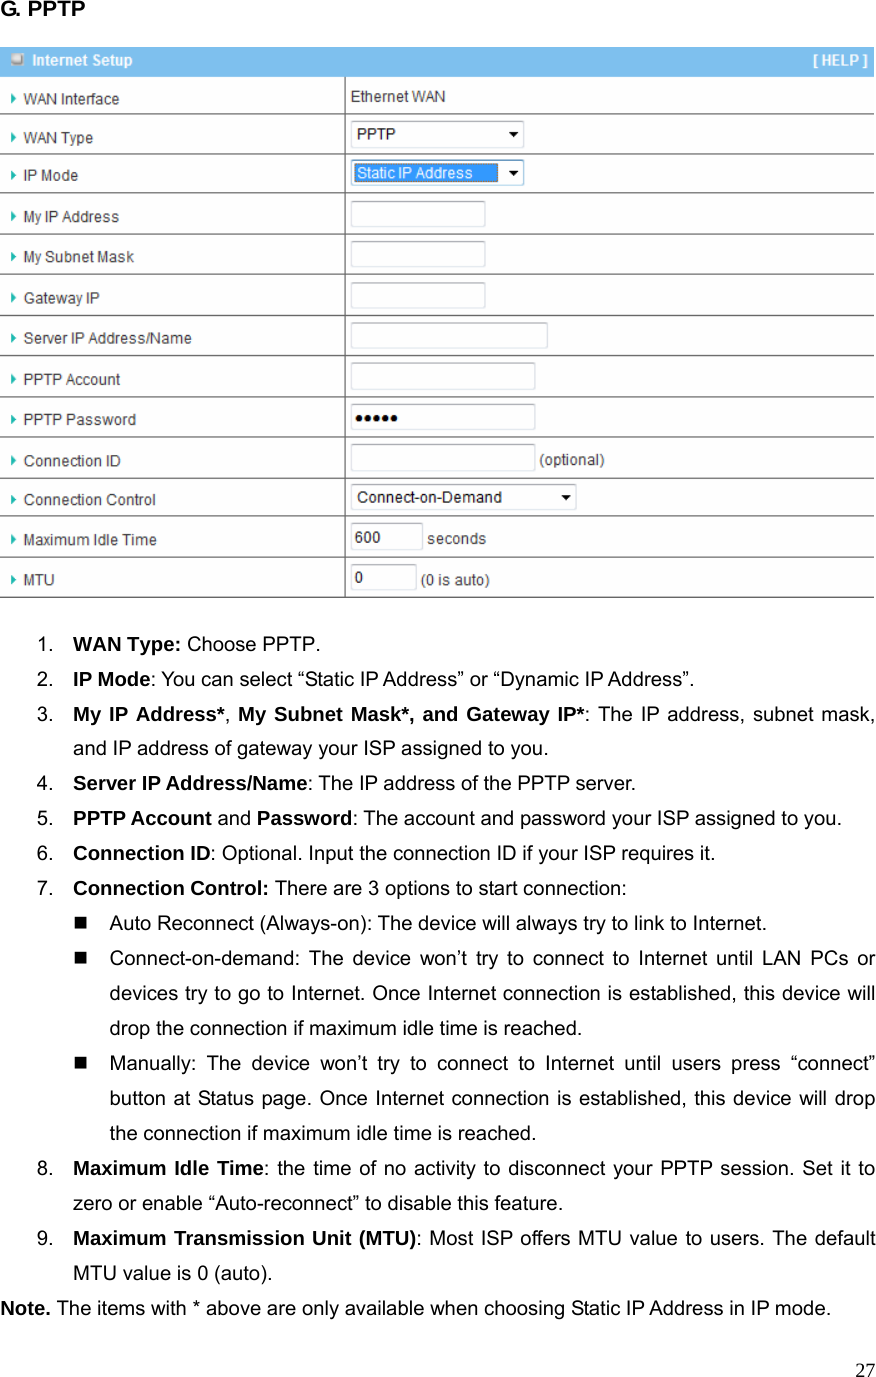  27G. PPTP      1.  WAN Type: Choose PPTP. 2.  IP Mode: You can select “Static IP Address” or “Dynamic IP Address”.   3.  My IP Address*, My Subnet Mask*, and Gateway IP*: The IP address, subnet mask, and IP address of gateway your ISP assigned to you.   4.  Server IP Address/Name: The IP address of the PPTP server. 5.  PPTP Account and Password: The account and password your ISP assigned to you. 6.  Connection ID: Optional. Input the connection ID if your ISP requires it.   7.  Connection Control: There are 3 options to start connection:     Auto Reconnect (Always-on): The device will always try to link to Internet.       Connect-on-demand: The device won’t try to connect to Internet until LAN PCs or devices try to go to Internet. Once Internet connection is established, this device will drop the connection if maximum idle time is reached.   Manually: The device won’t try to connect to Internet until users press “connect” button at Status page. Once Internet connection is established, this device will drop the connection if maximum idle time is reached. 8.  Maximum Idle Time: the time of no activity to disconnect your PPTP session. Set it to zero or enable “Auto-reconnect” to disable this feature. 9.  Maximum Transmission Unit (MTU): Most ISP offers MTU value to users. The default MTU value is 0 (auto). Note. The items with * above are only available when choosing Static IP Address in IP mode.   